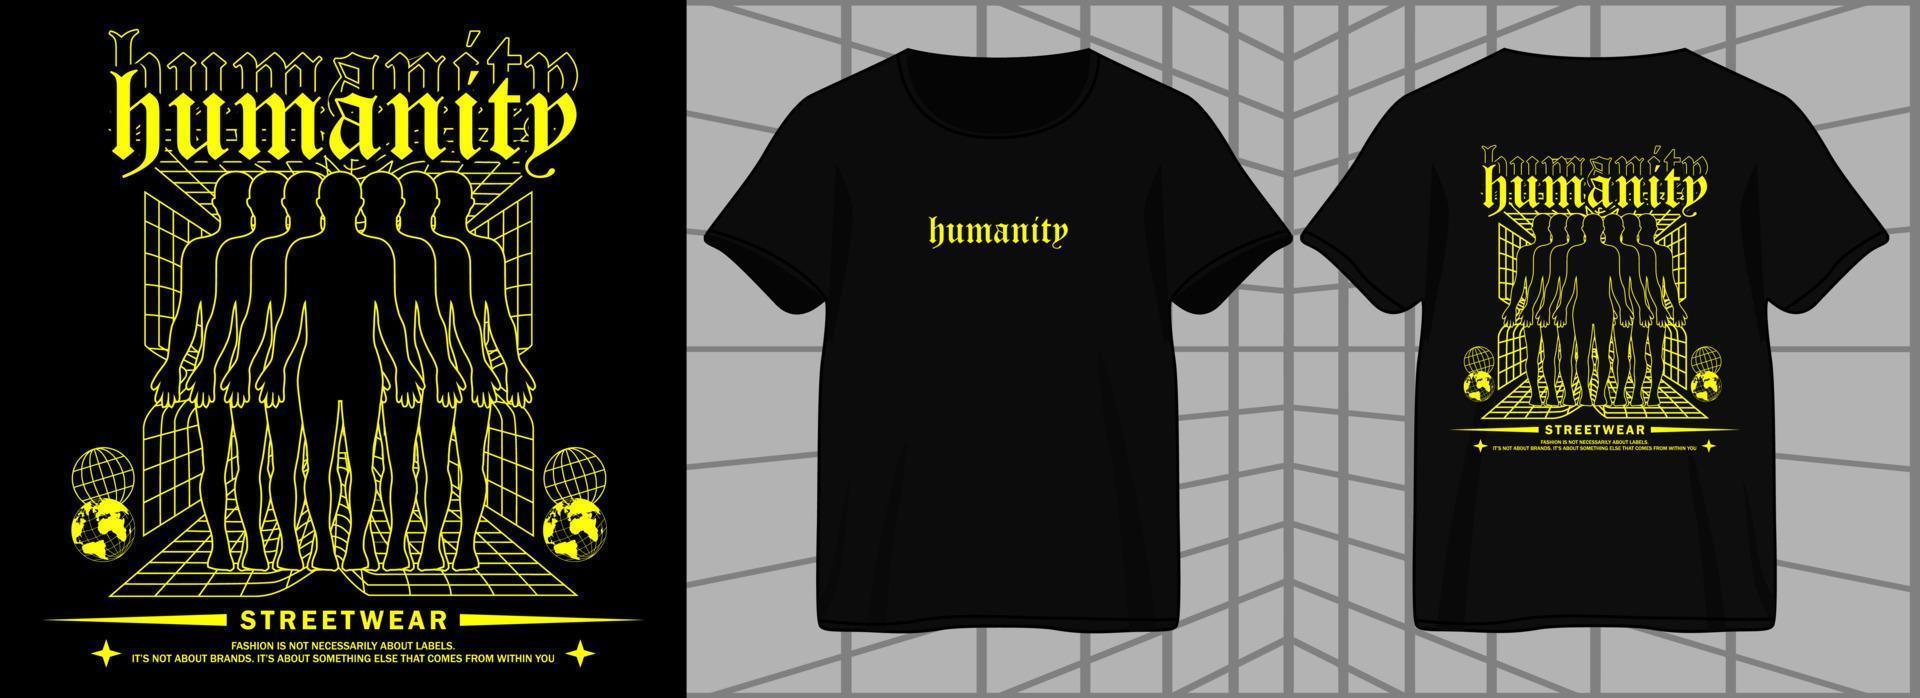 humanity aesthetic graphic design for t shirt streetwear and urban style vector